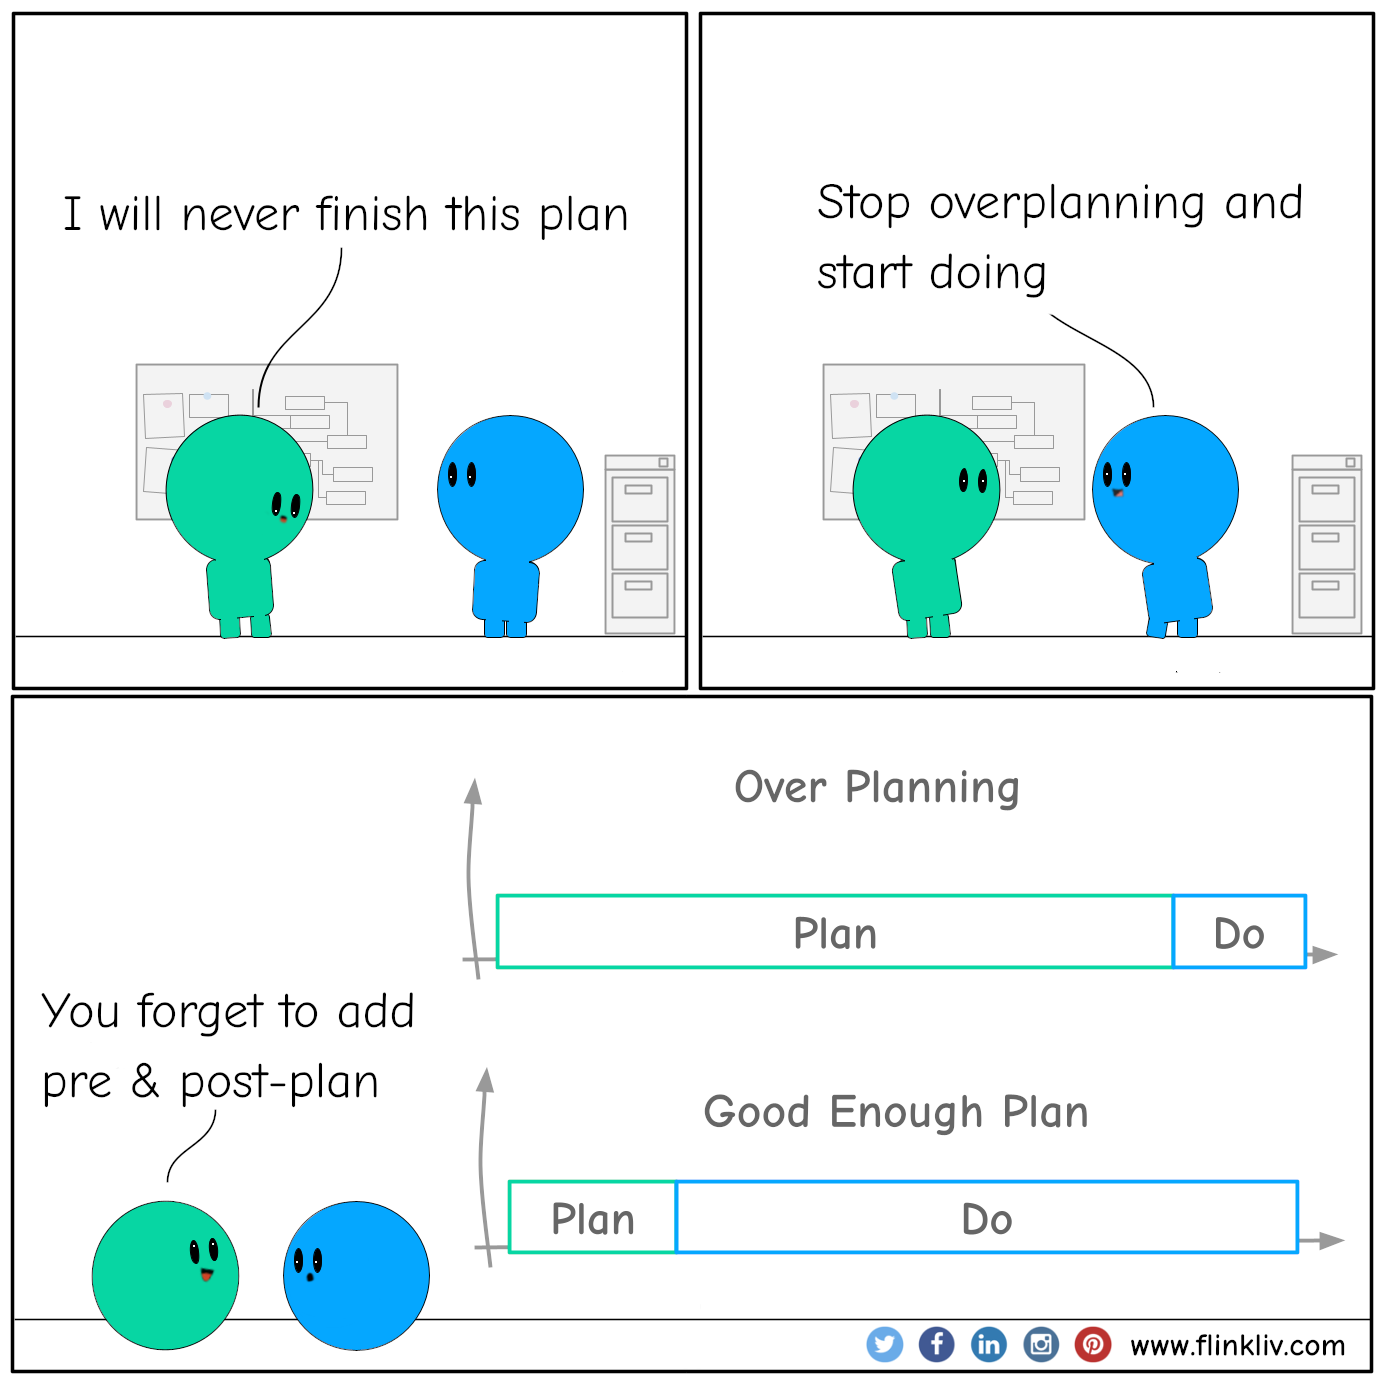 Conversation between A and B about overplanning
    A: I will never finish this plan.
    B: Stop overplanning and start doing.
    A: You forget to add pre & post-plan.
    By flinkliv.com